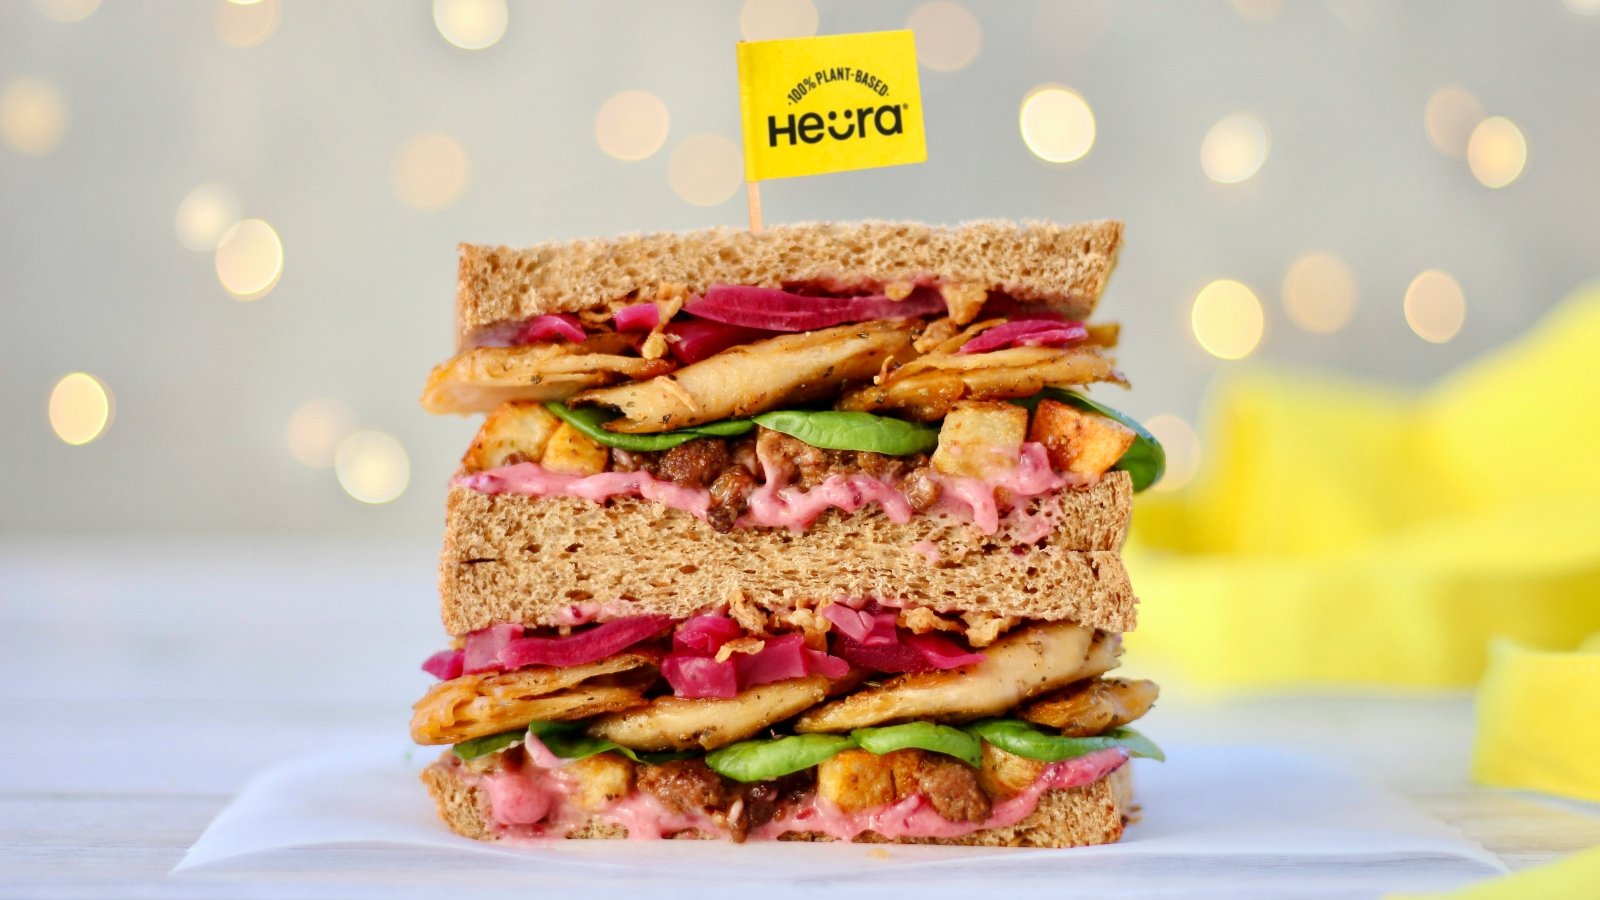 Heura Is Handing Out 5,000 Vegan Sandwiches For Free In London - But For A Limited Time